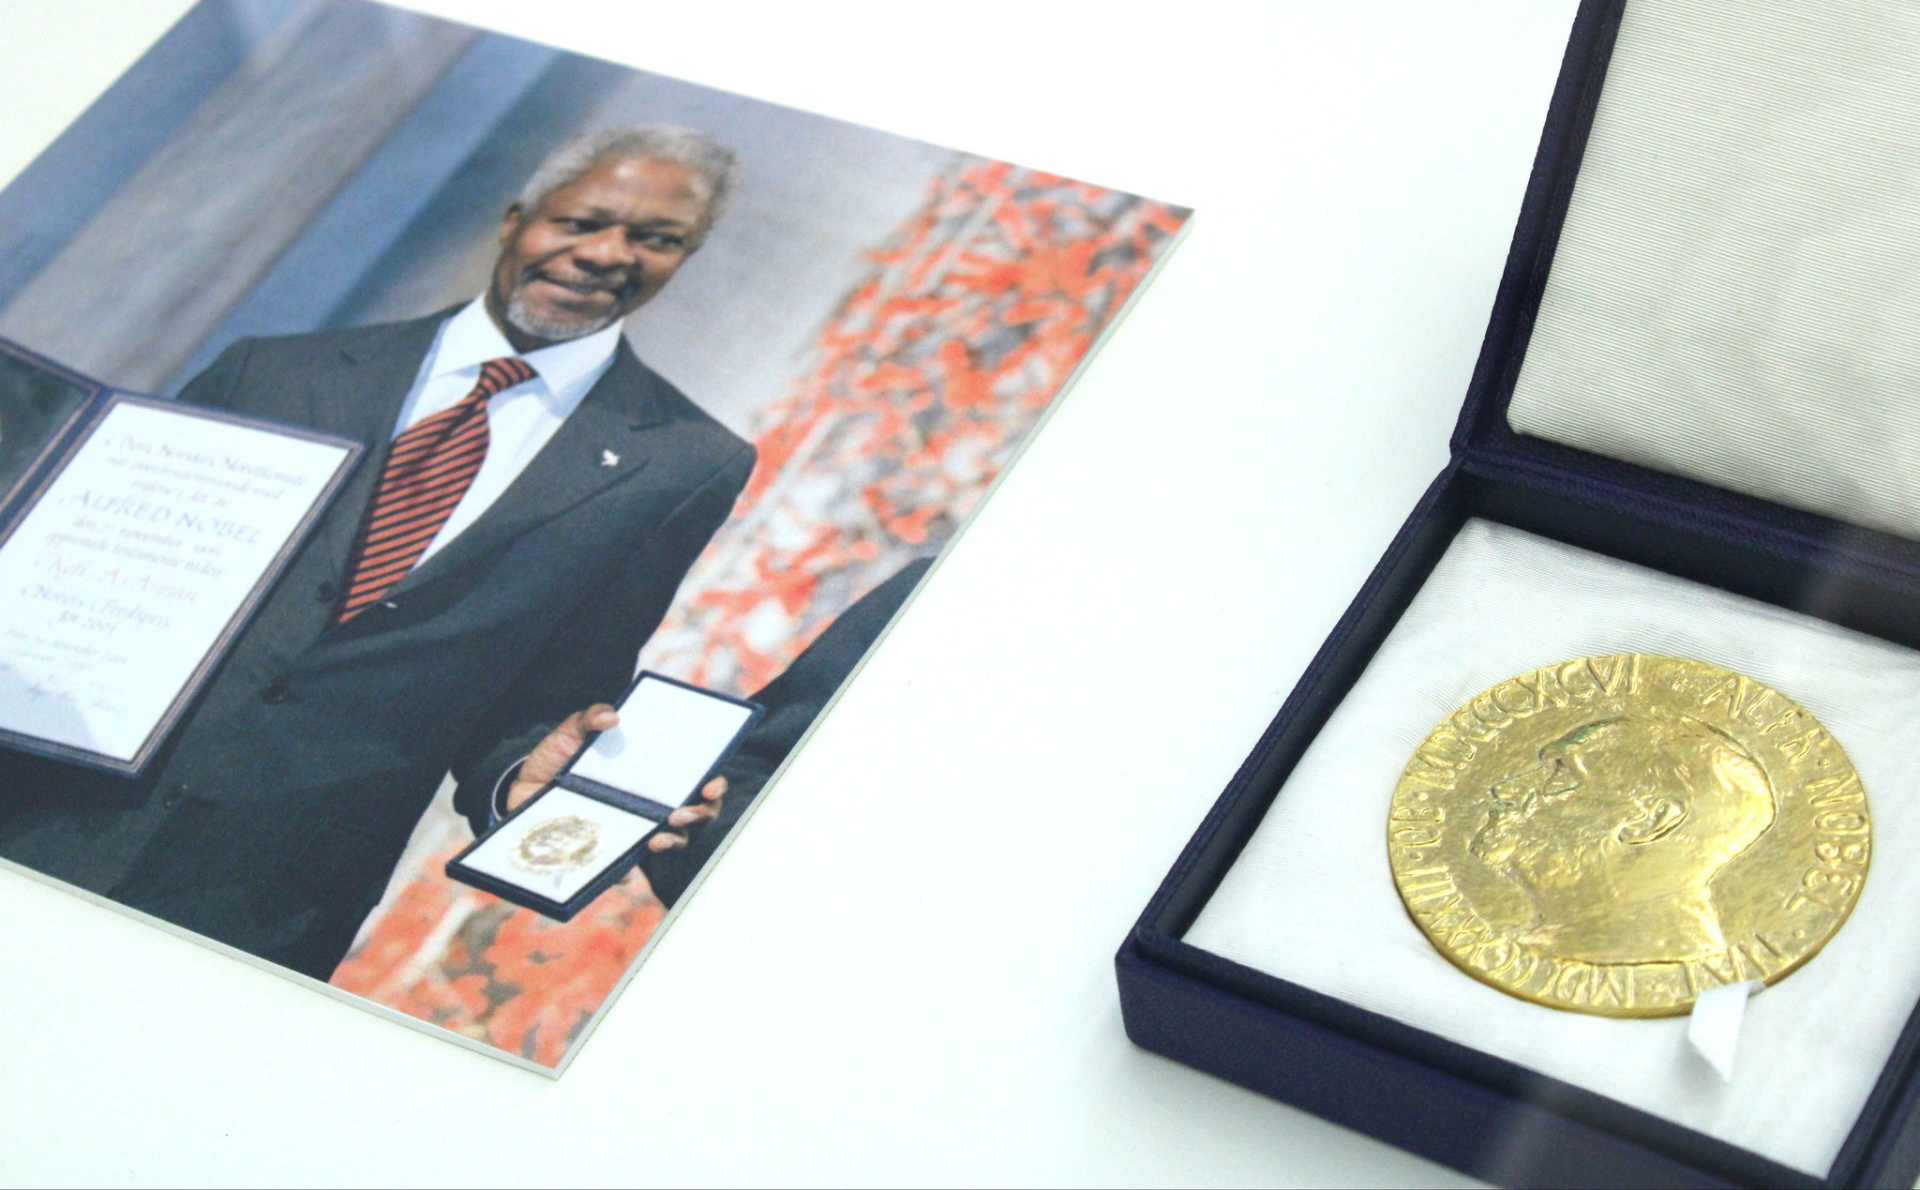 A photo of Kofi Annan next to the Nobel Peace Price medal which he received in 2001in 